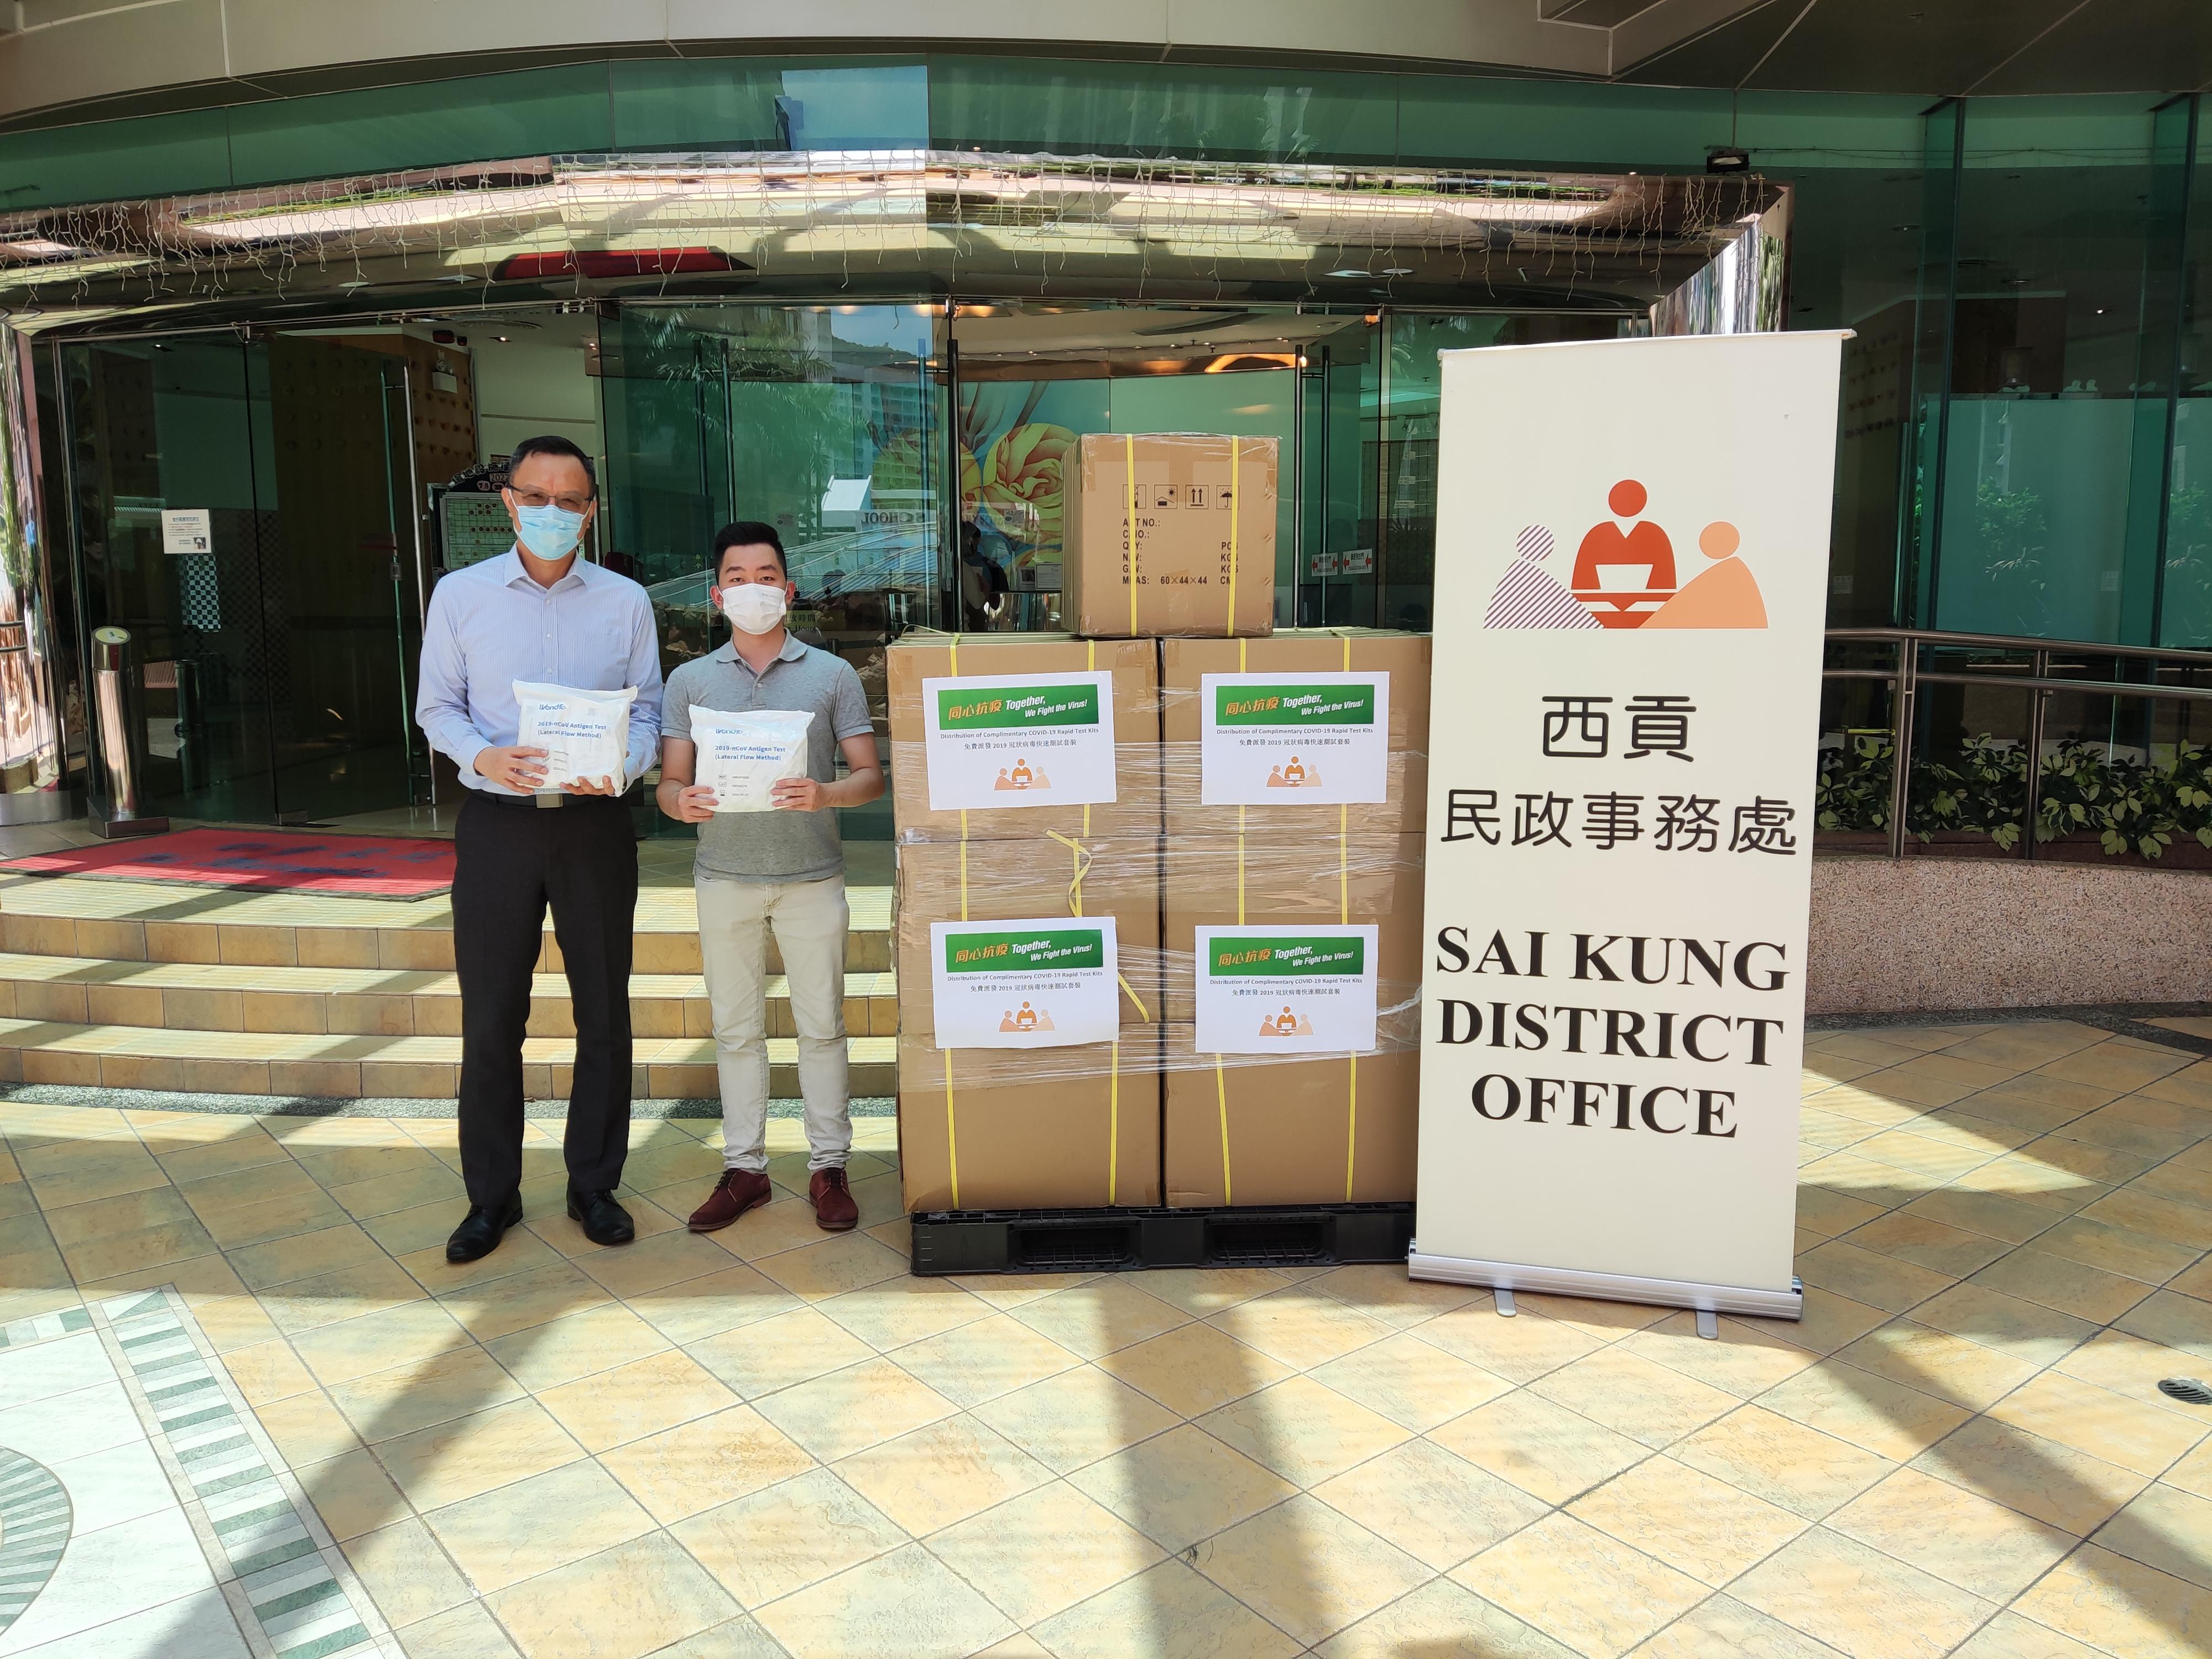 The Sai Kung District Office today (July 28) distributed COVID-19 rapid test kits to households, cleansing workers and property management staff living and working in The Metropolis for voluntary testing through the property management company.